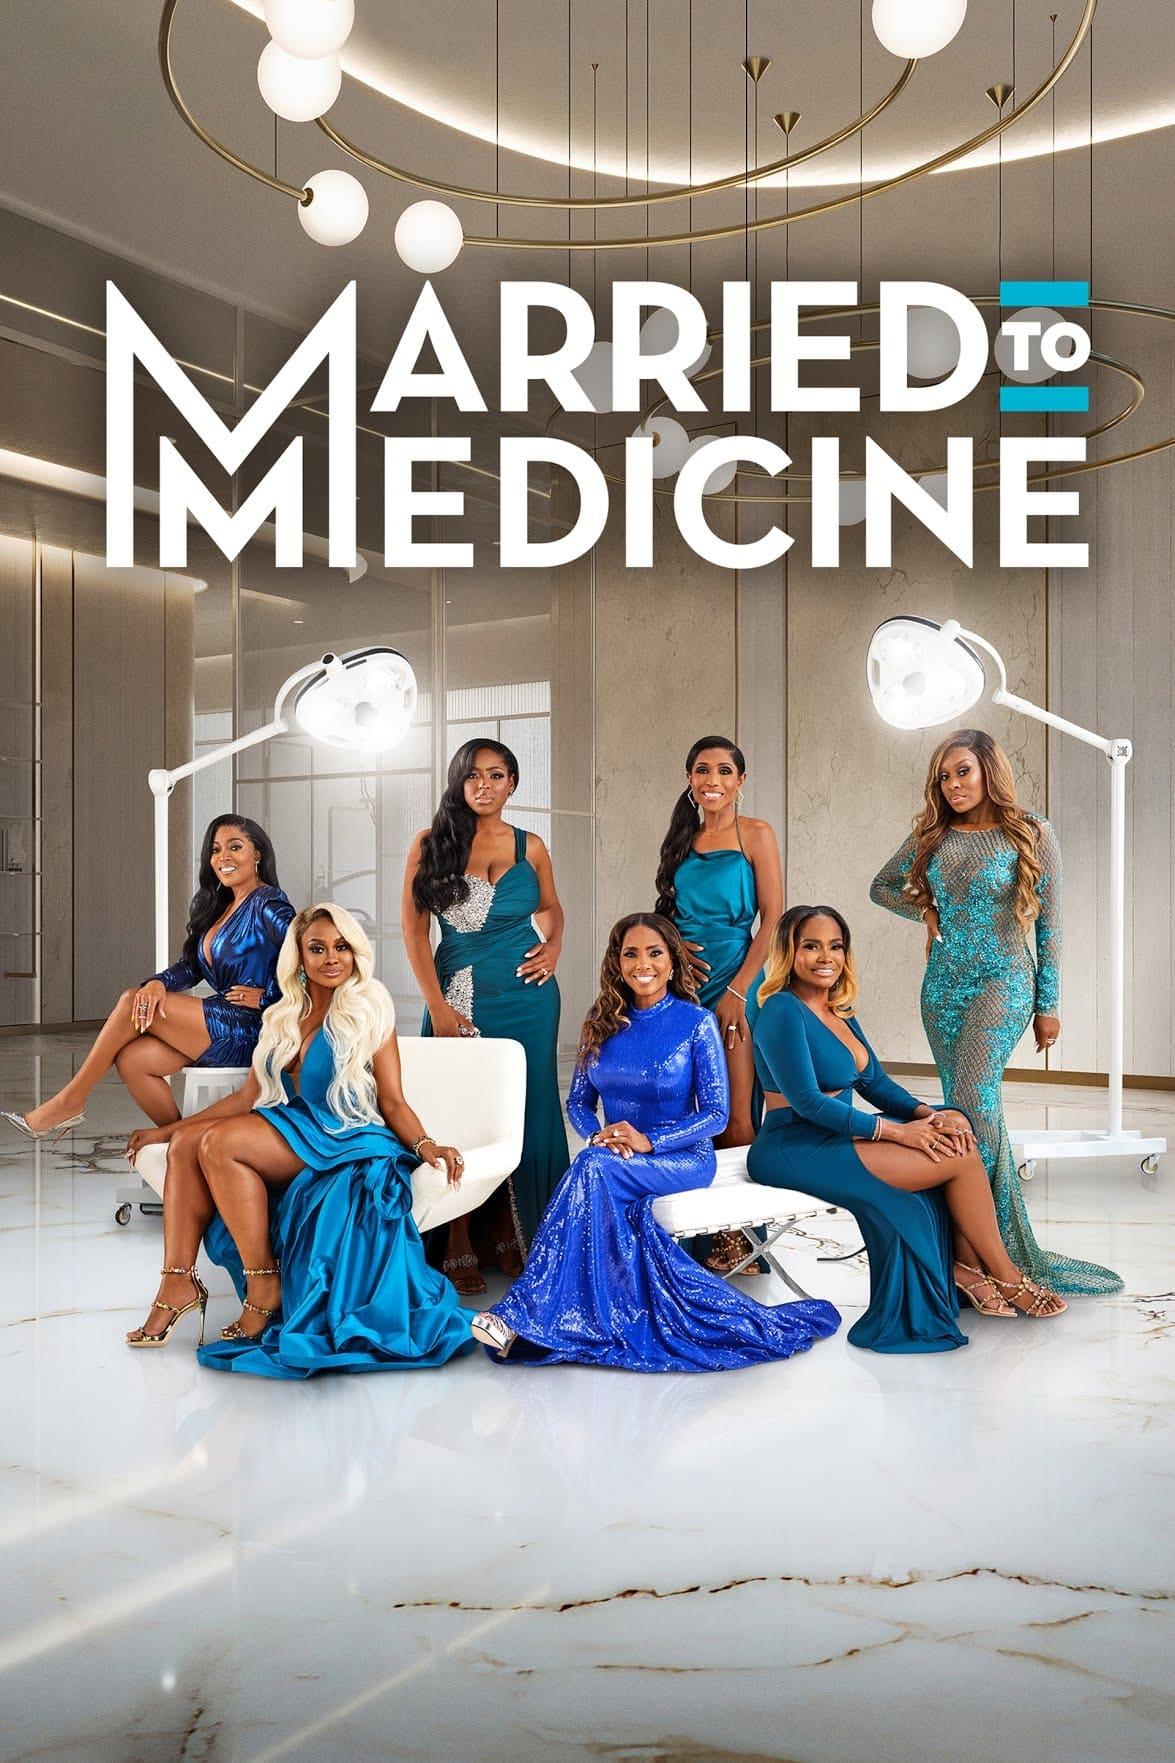 Married to Medicine poster